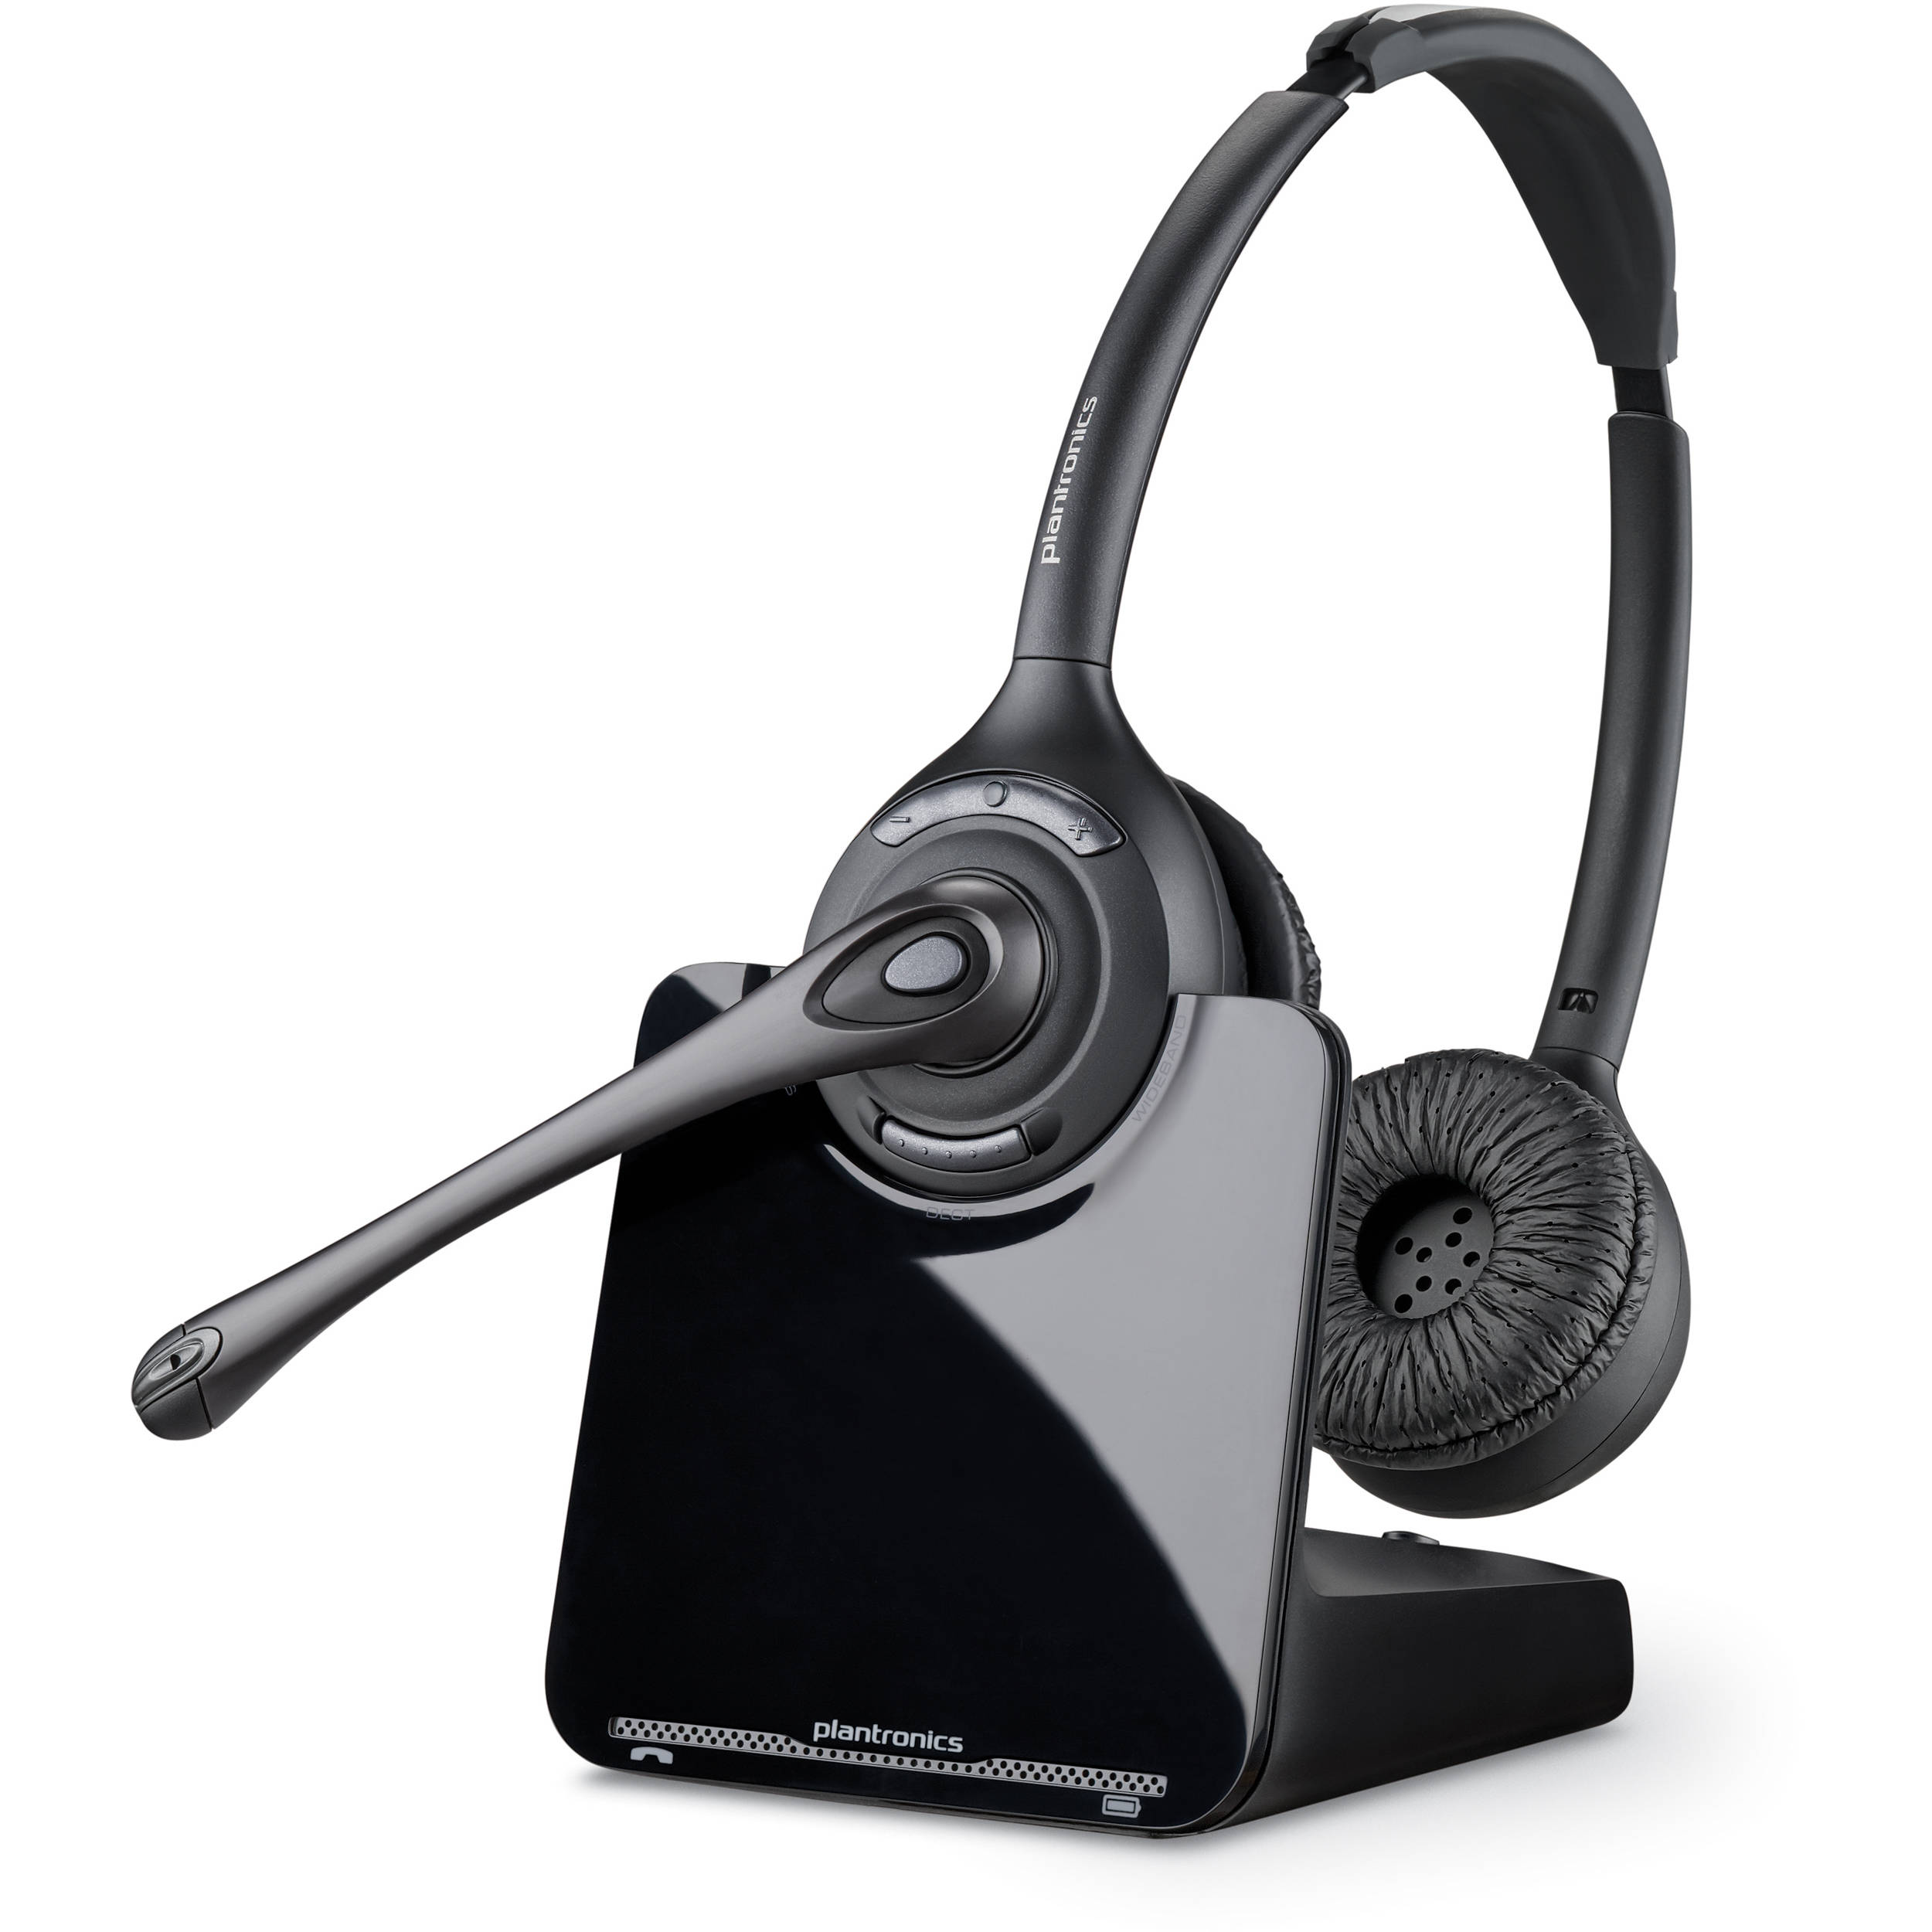 Plantronics CS540 Wireless Headset Free Shipping Excellent Condition